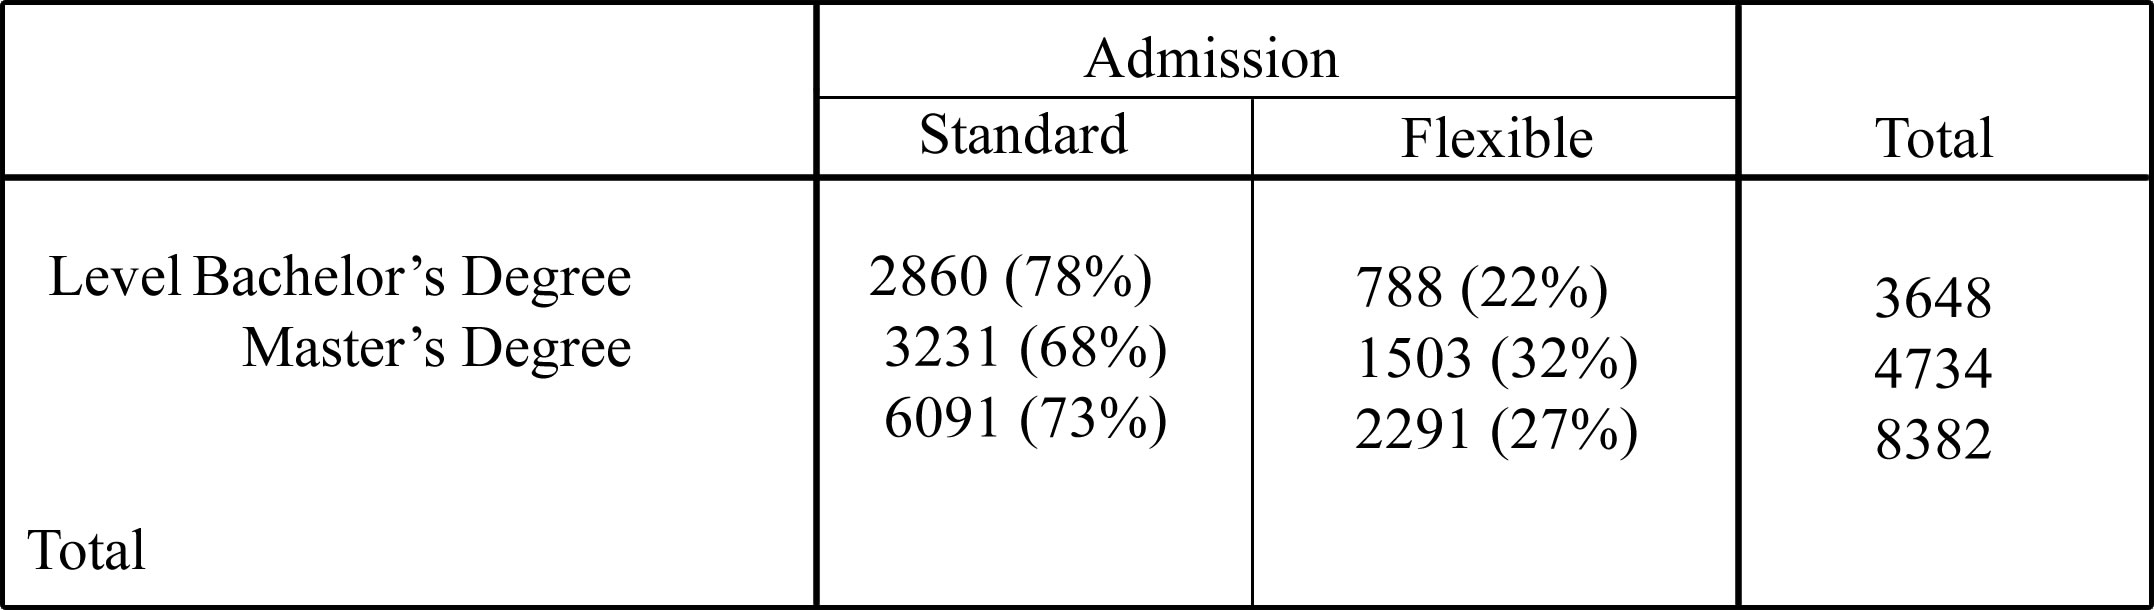 Table 2. Admission Type by Degree Level.